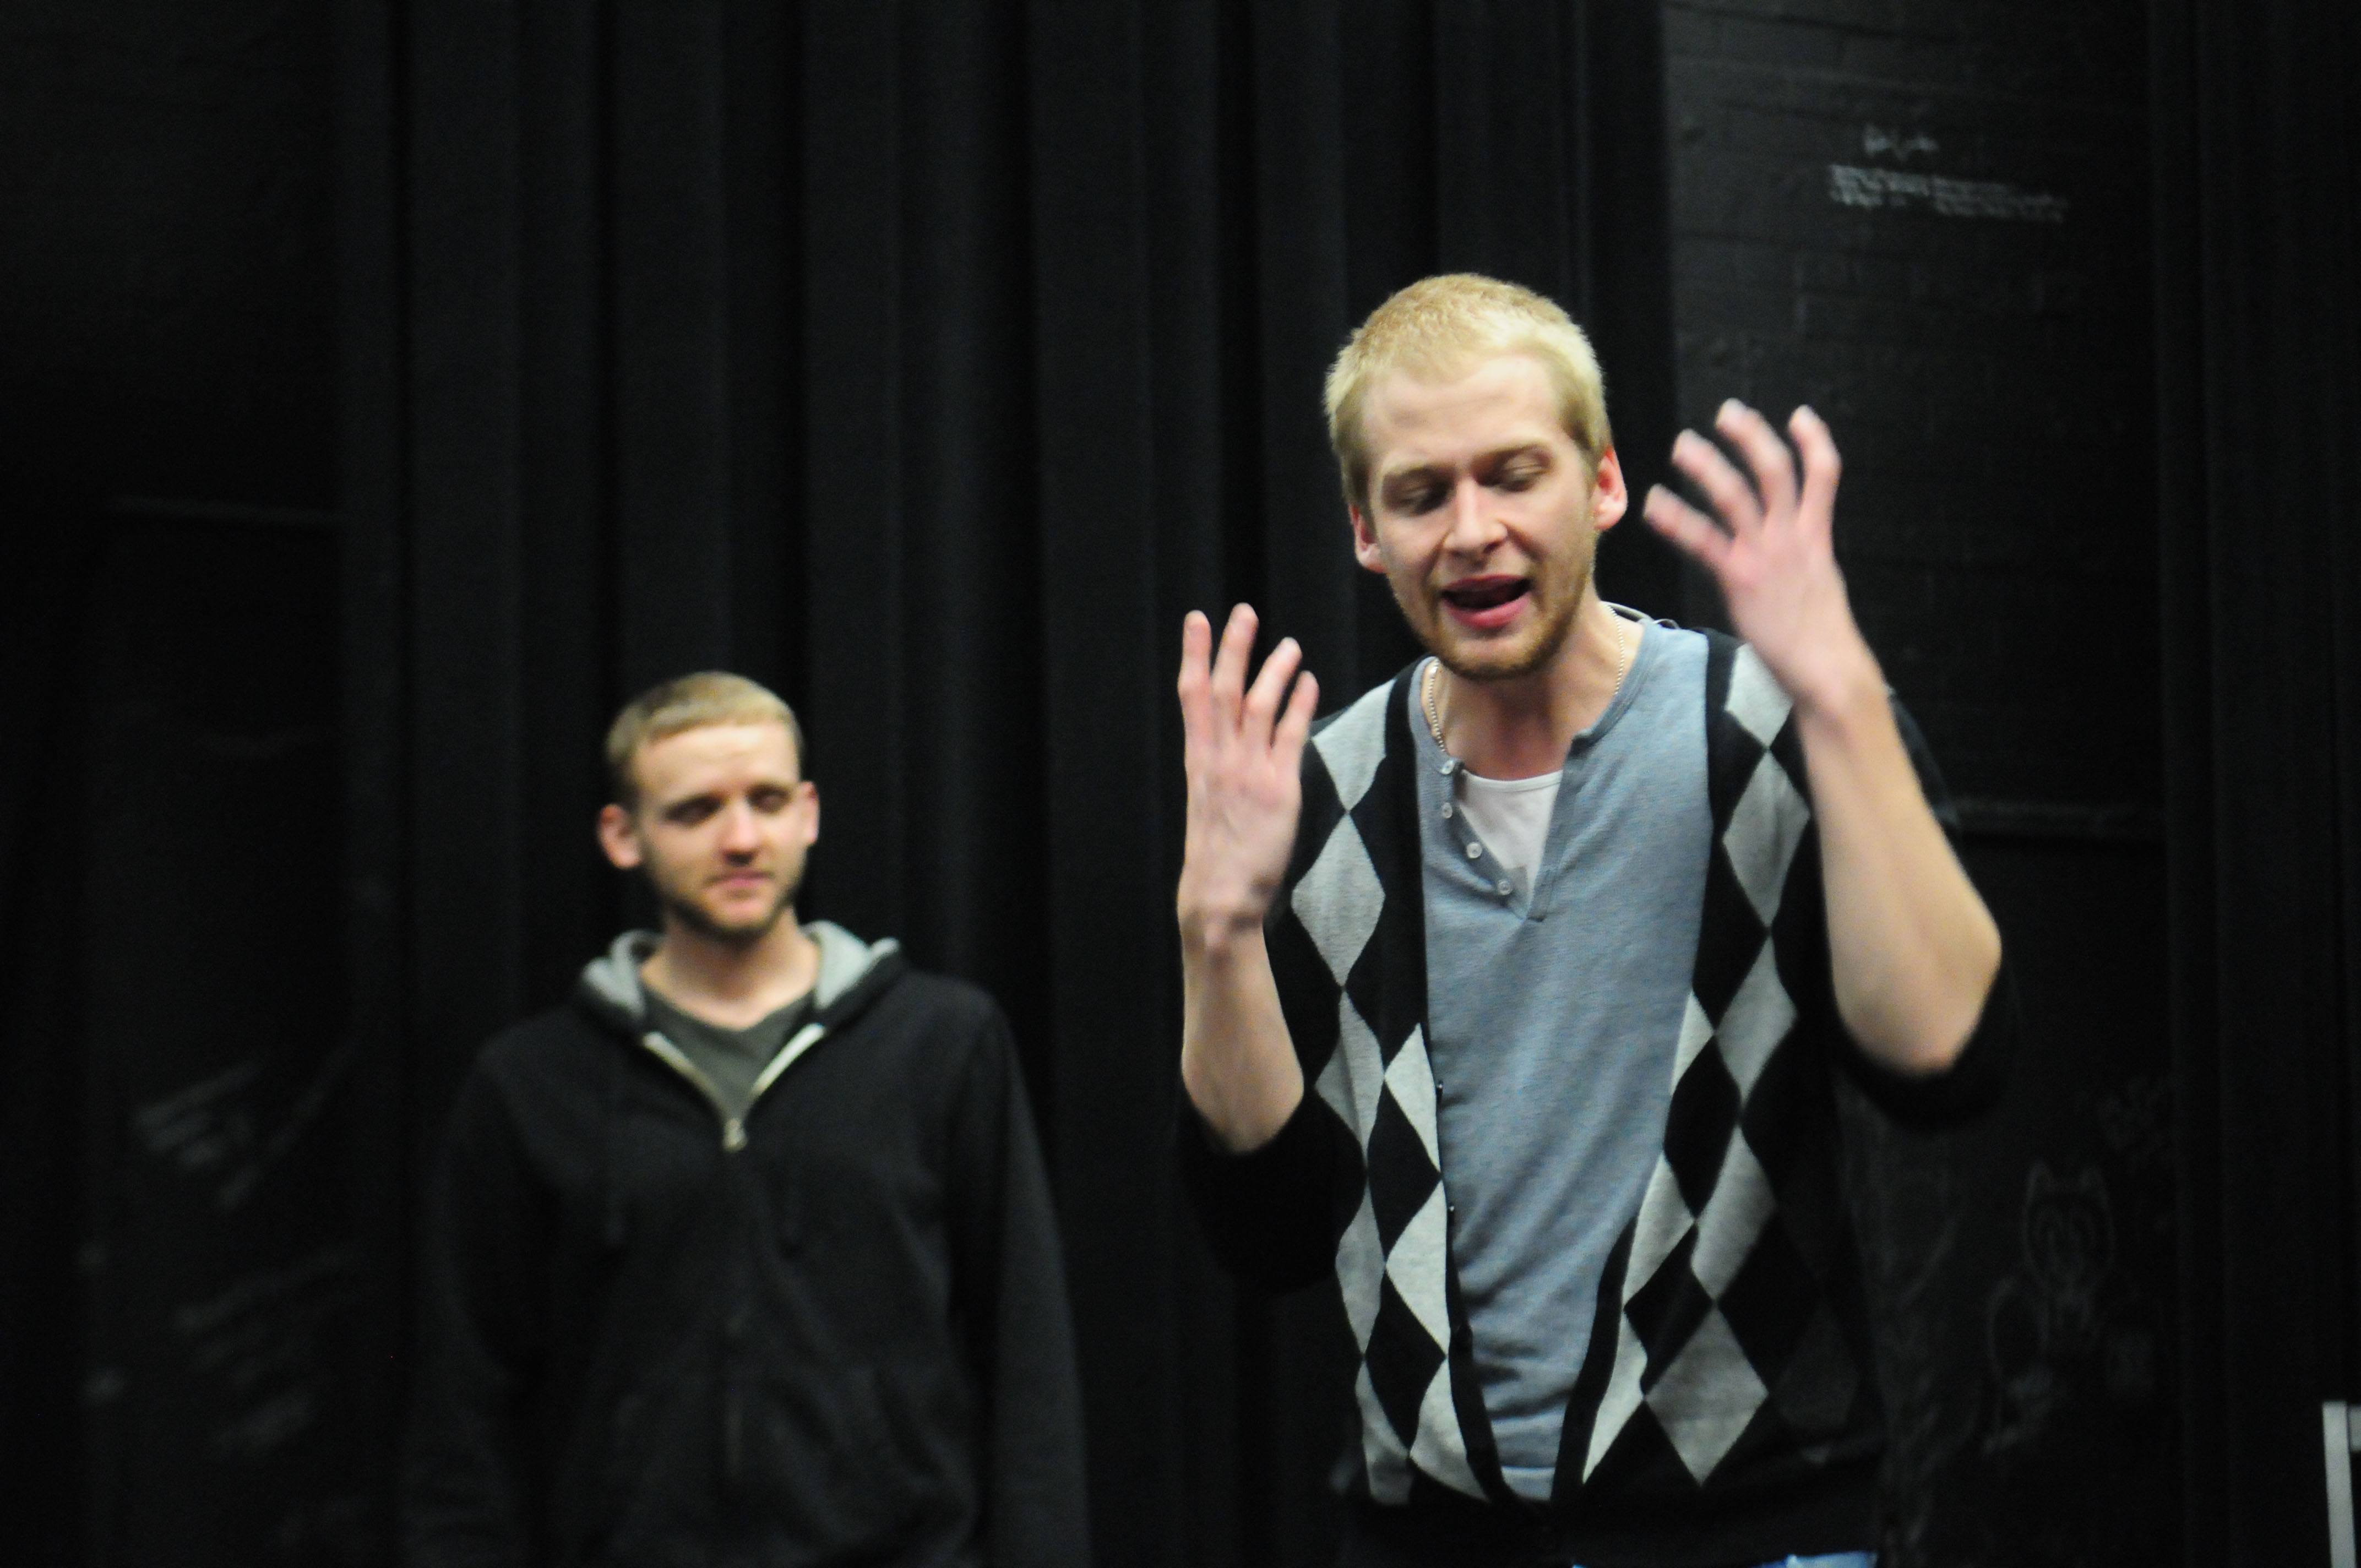 WORKING IT OUT- Ryan Mattila and Chad Pitura rehearse a scene from Ignition Theatre’s Dog Sees God: Confessions of a Teenage Blockhead. The play is currently running at The Matchbox.